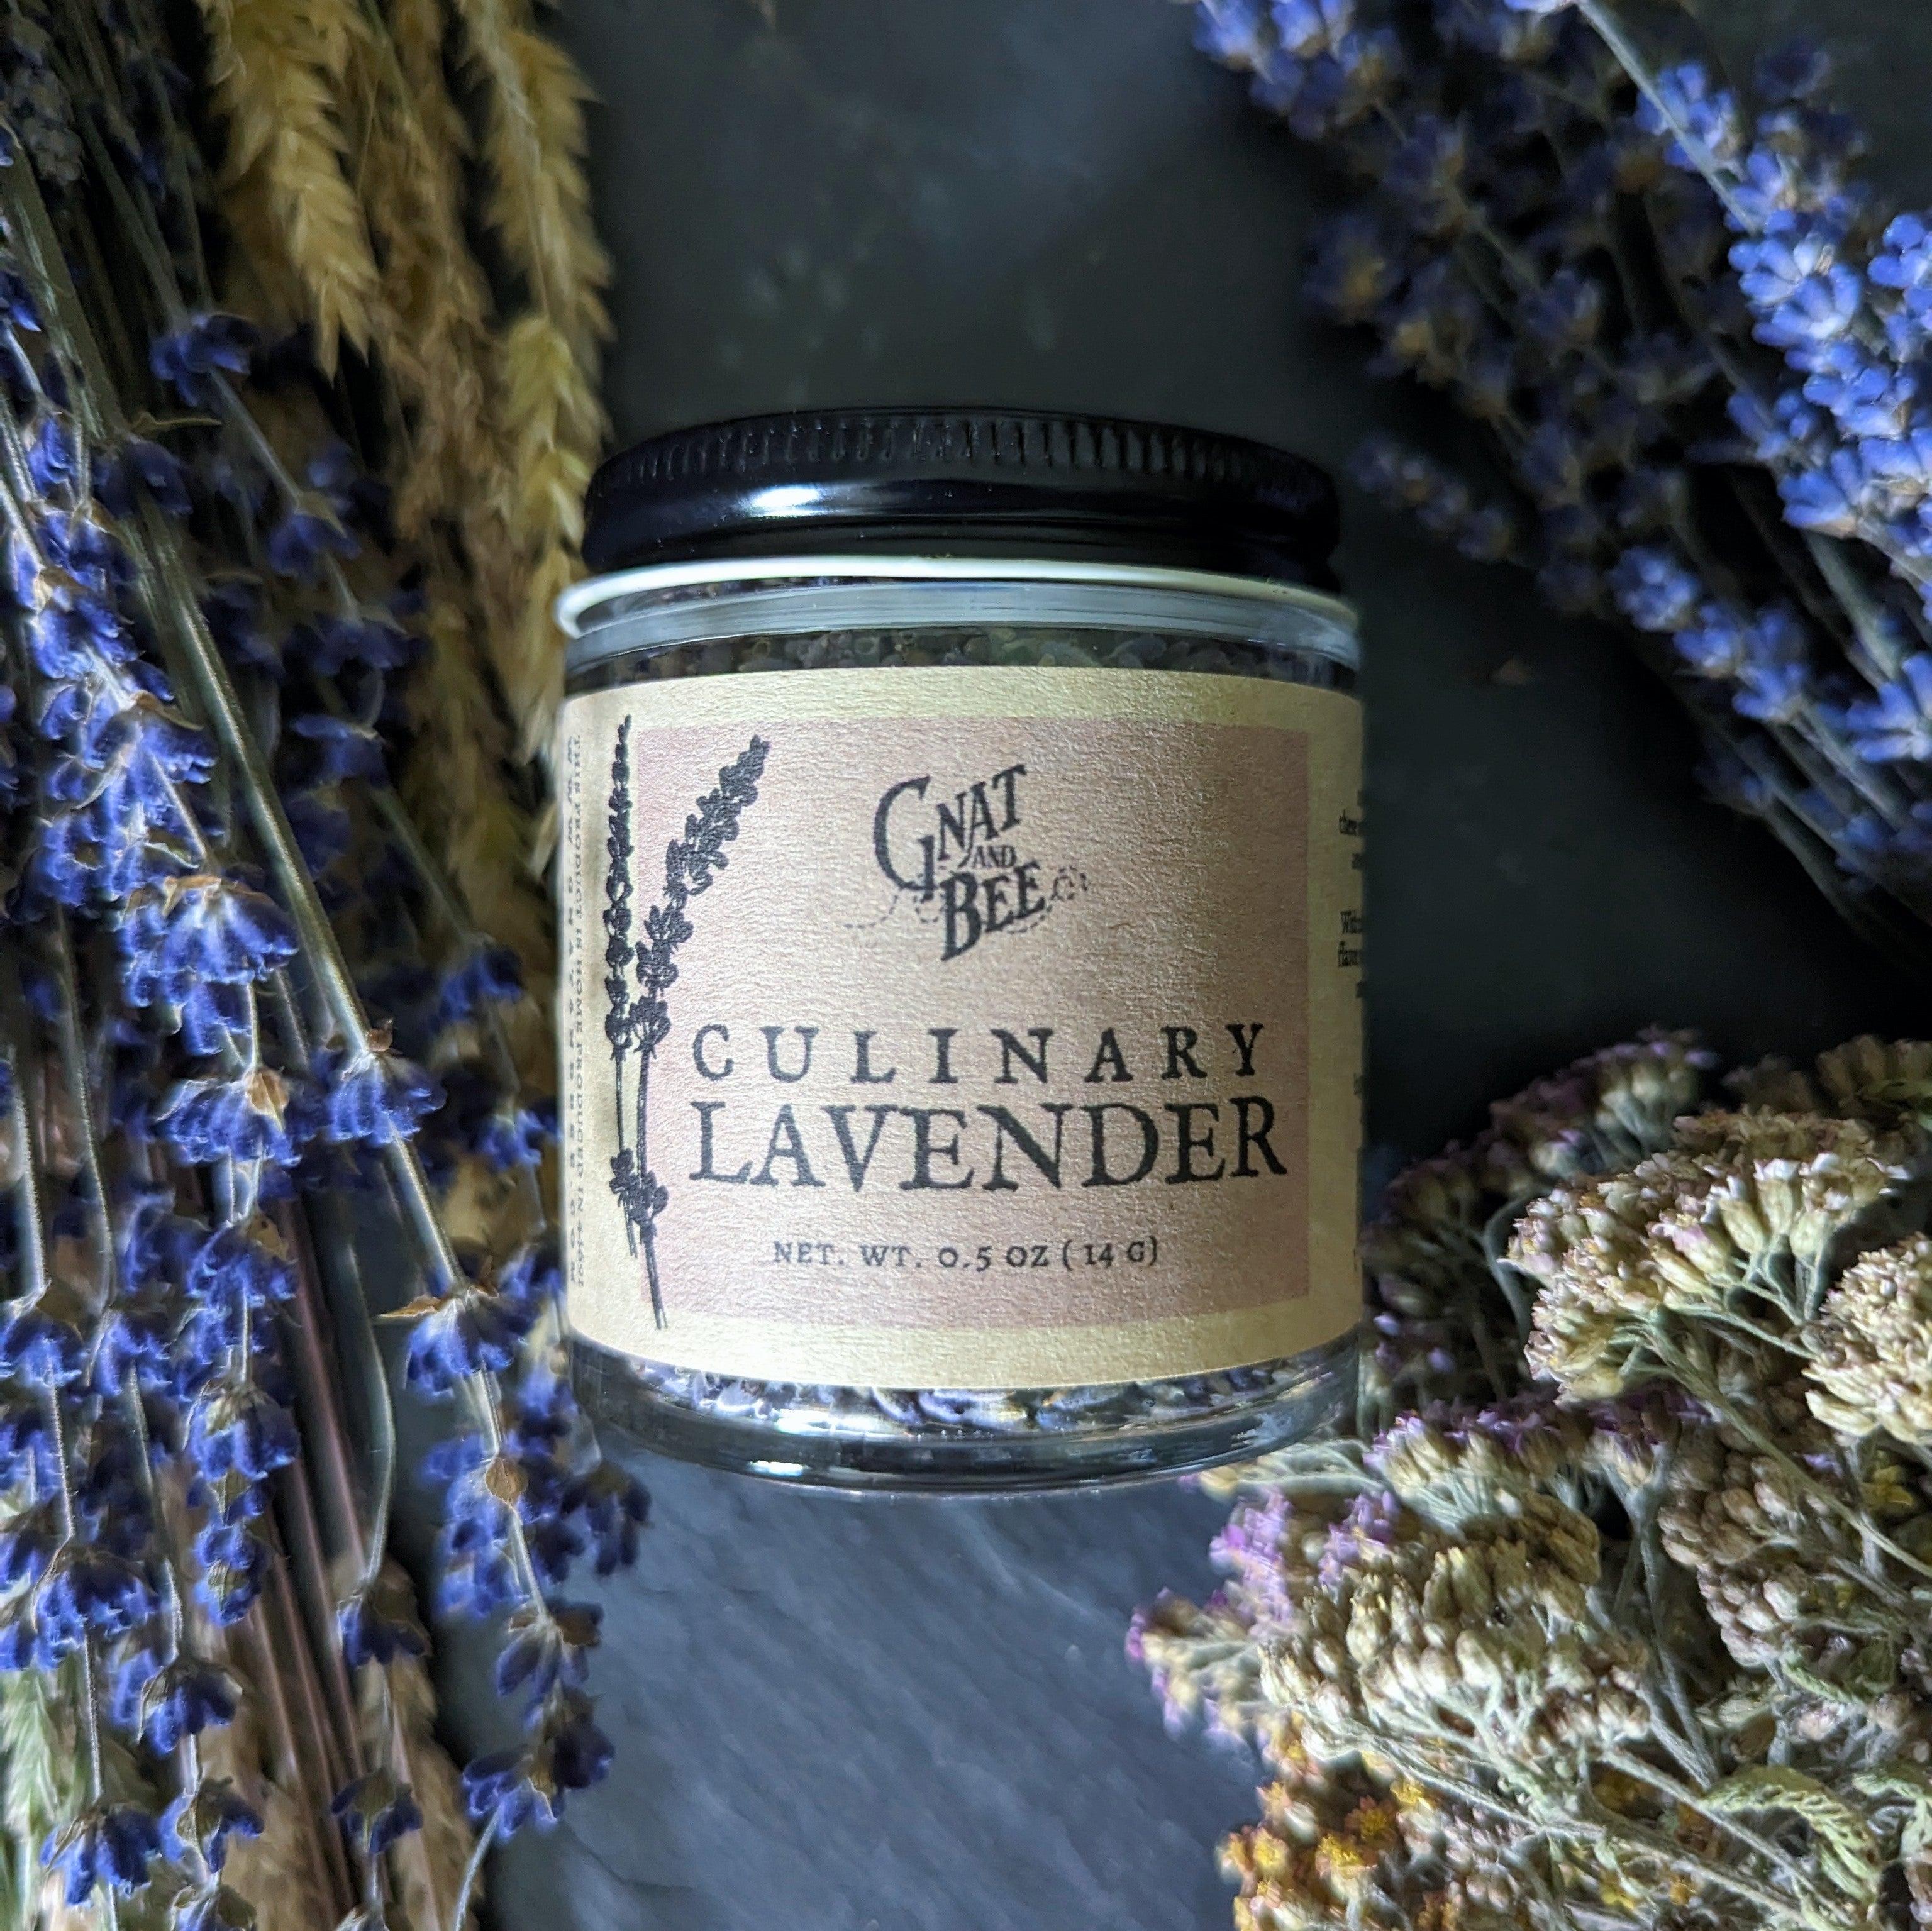 Culinary Lavender – Gnat and Bee